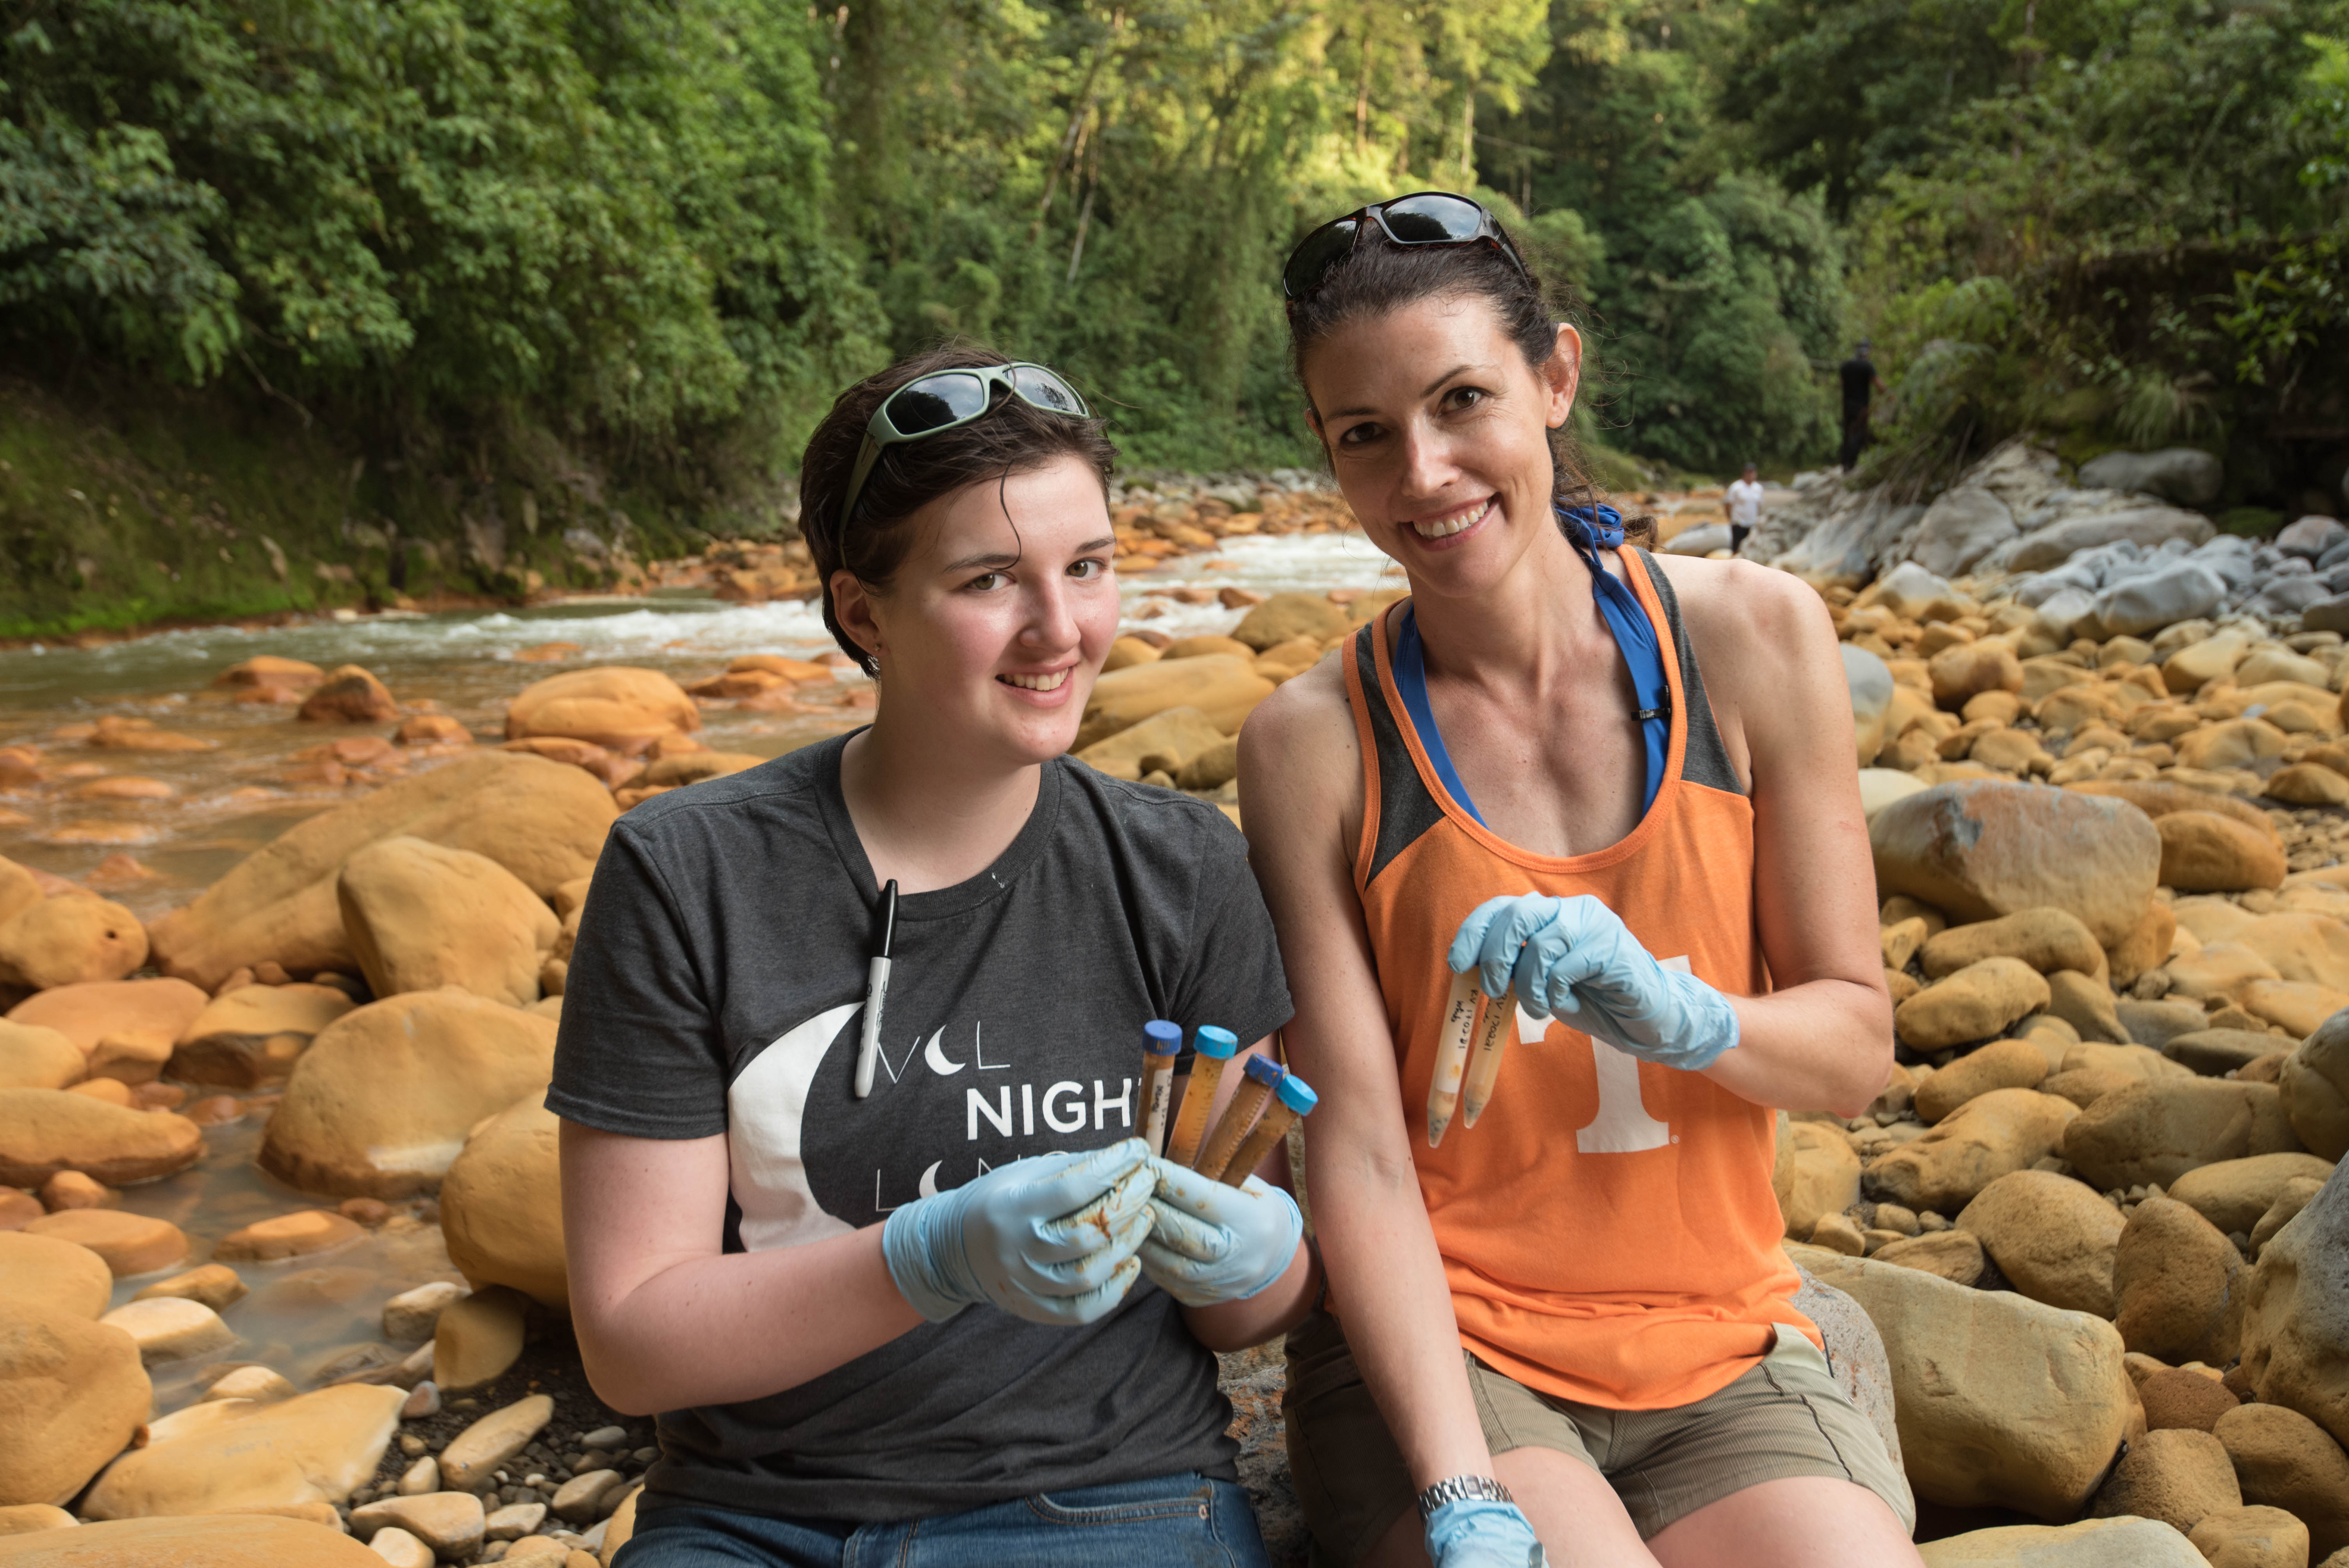 Microbiology professor, Karen Loyd, and PhD student Katie Fullerton, on a research trip to Costa Rica. Loyd and her team studied carbon lifeforms in warm springs and volcanos. Scientists from around the world participated in the study. Photo by Tom Owens